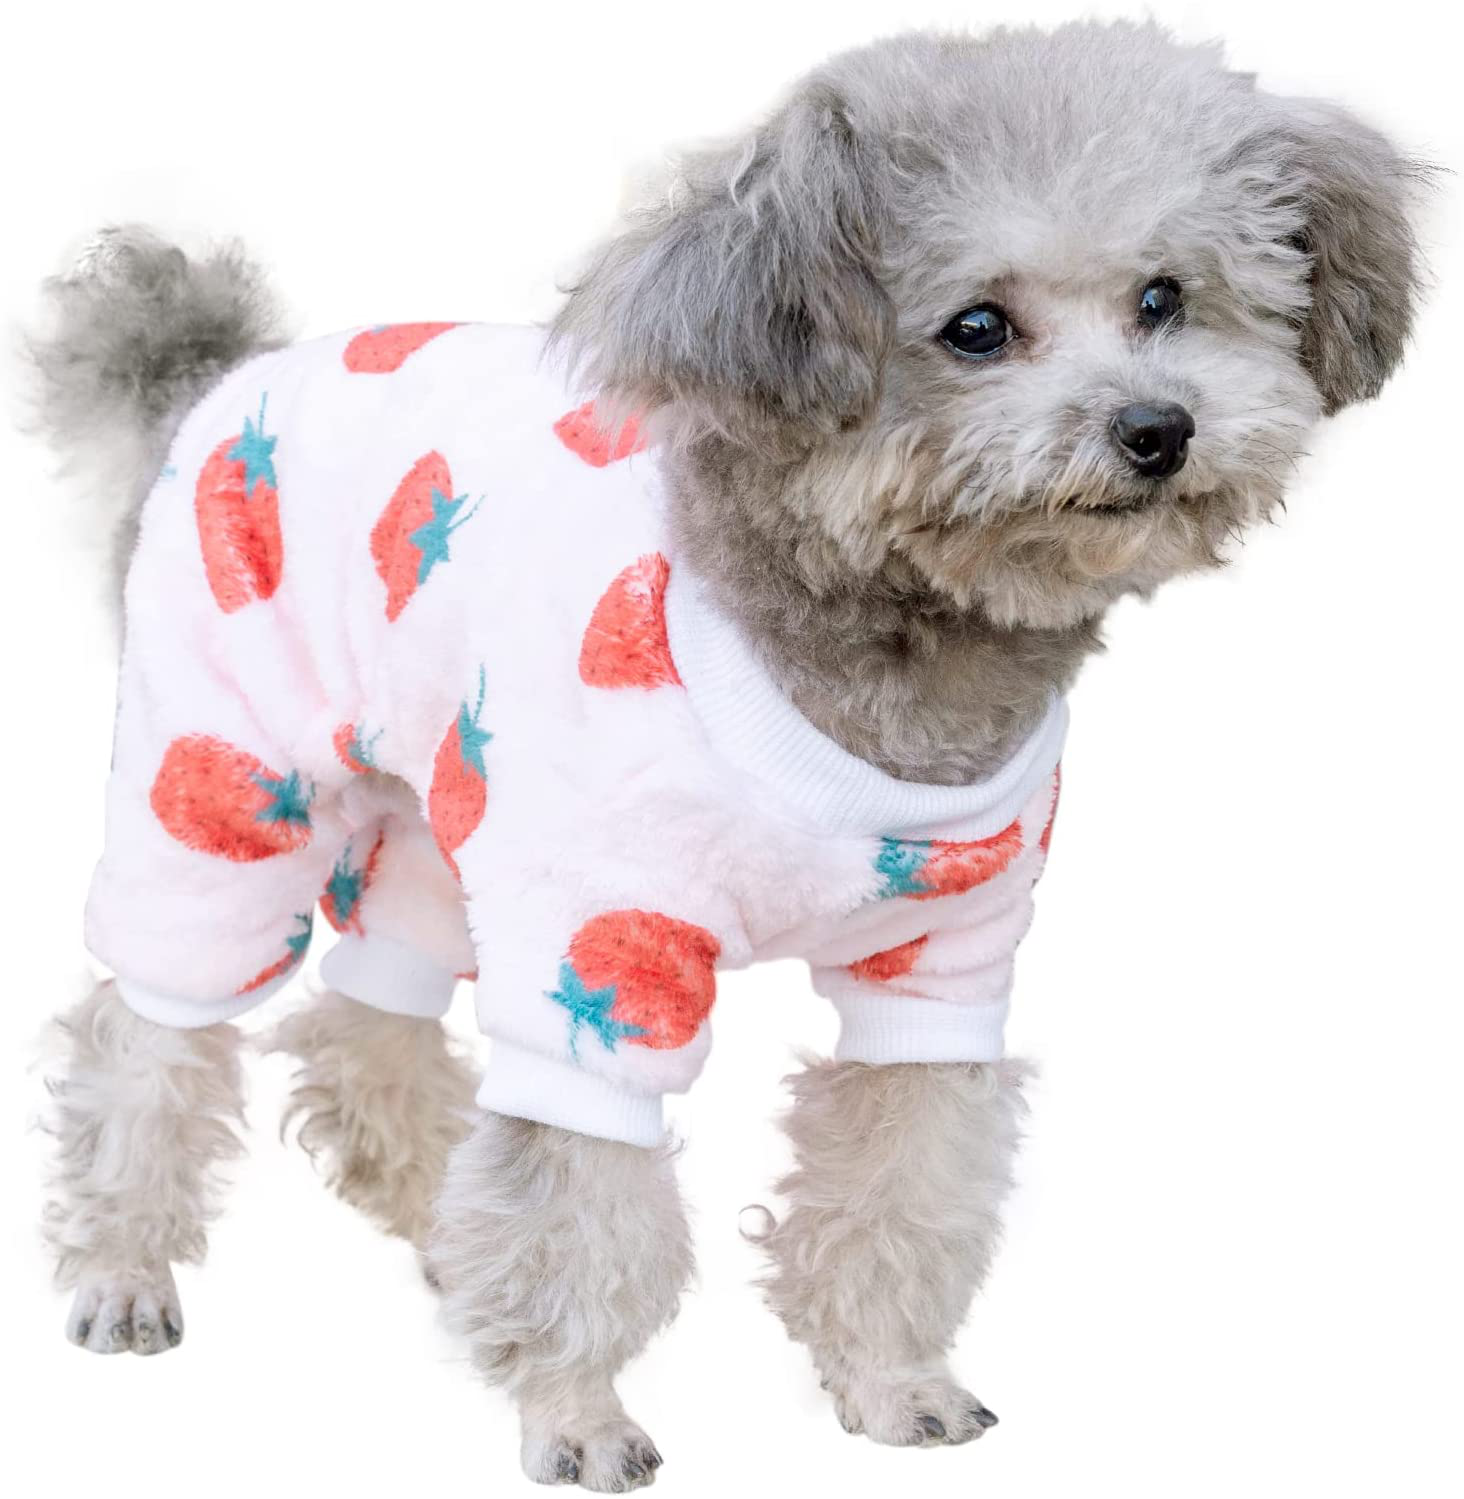 Cutebone Dog Christmas Sweater Coat Thick Velvet Pet Clothes Cat Onesie Fit Your Puppy Warm in Frozen Cold Weather